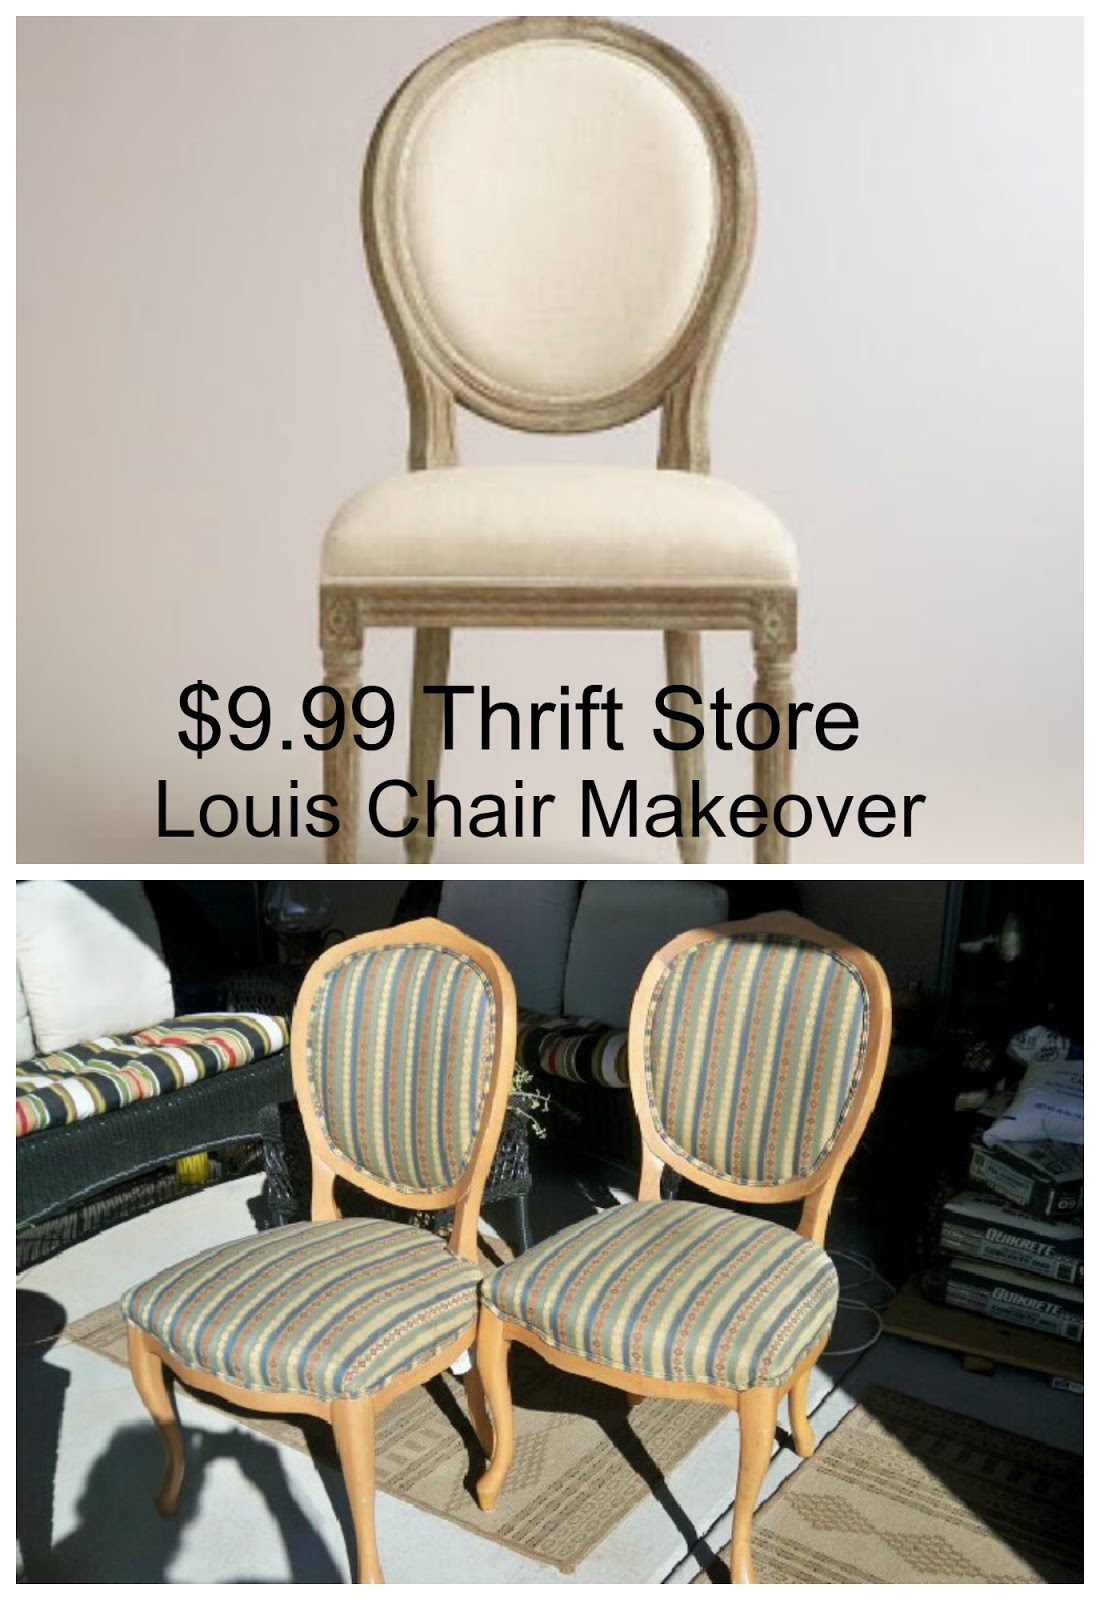 My $9.99 Louis Chairs - Upholstering & Staining The Frames